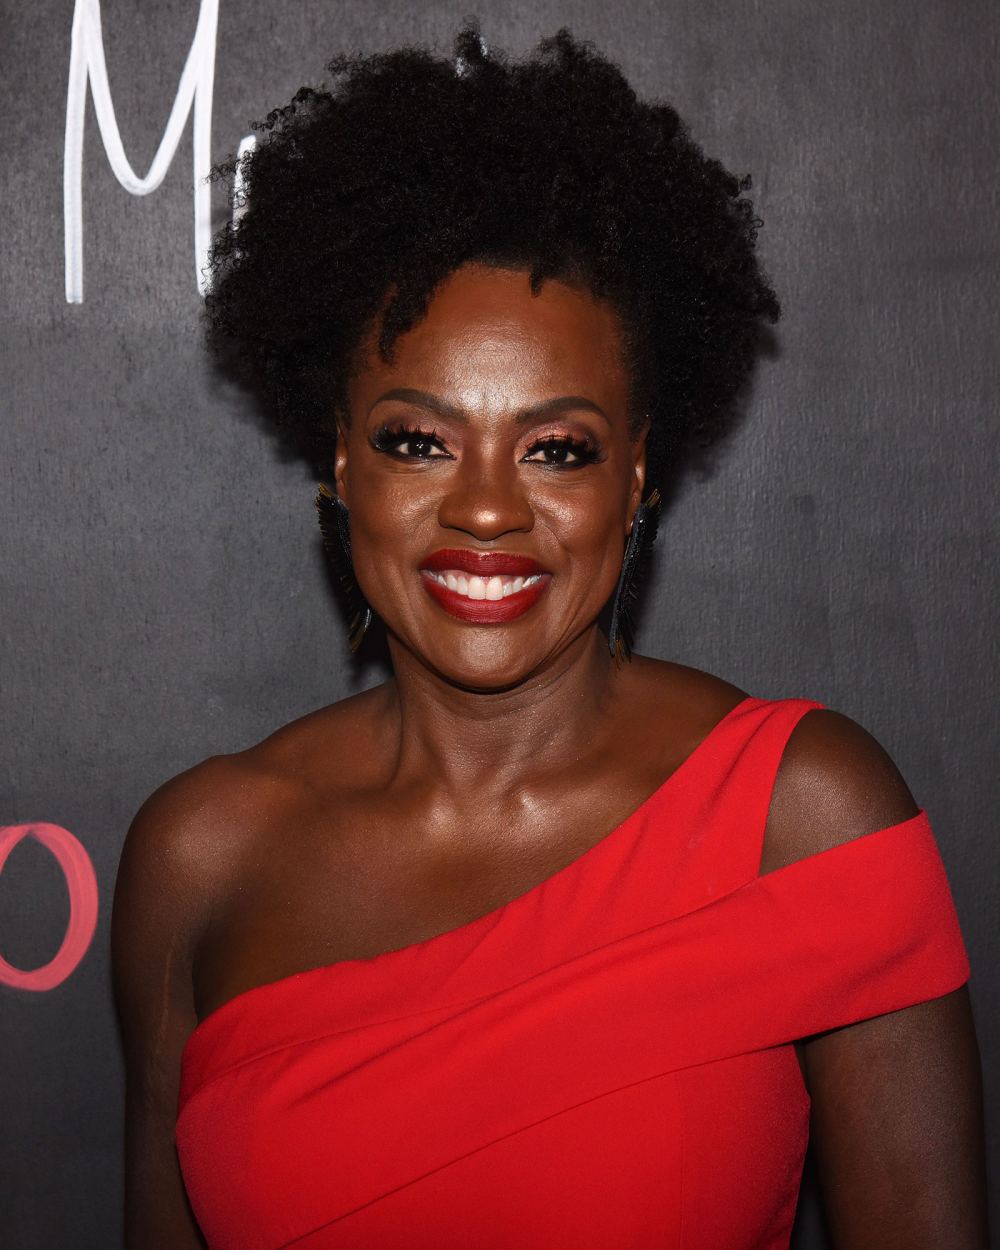 Viola Davis Shares Her Favorite TV Shows and Books for Black History Month